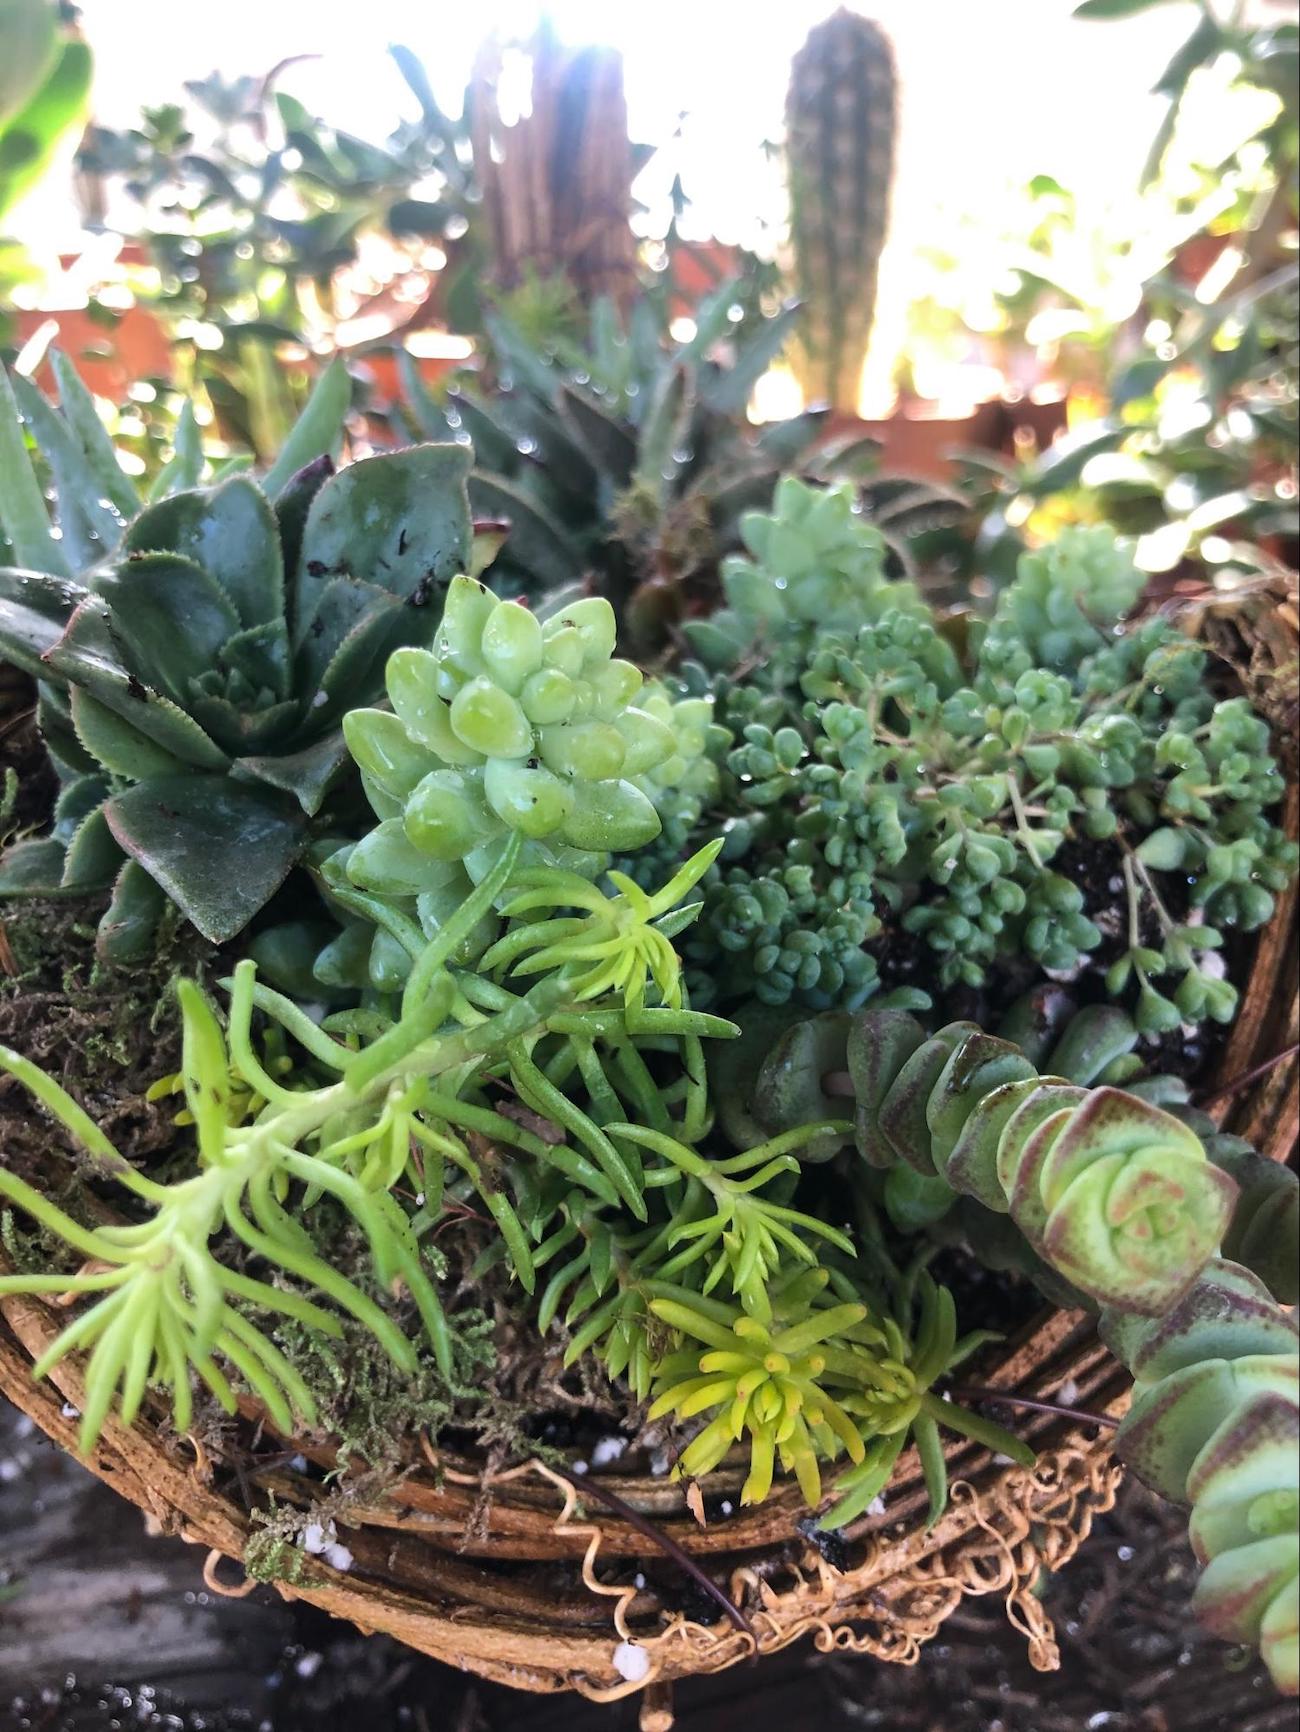 Cover bare parts of cornucopia with more succulents or moss